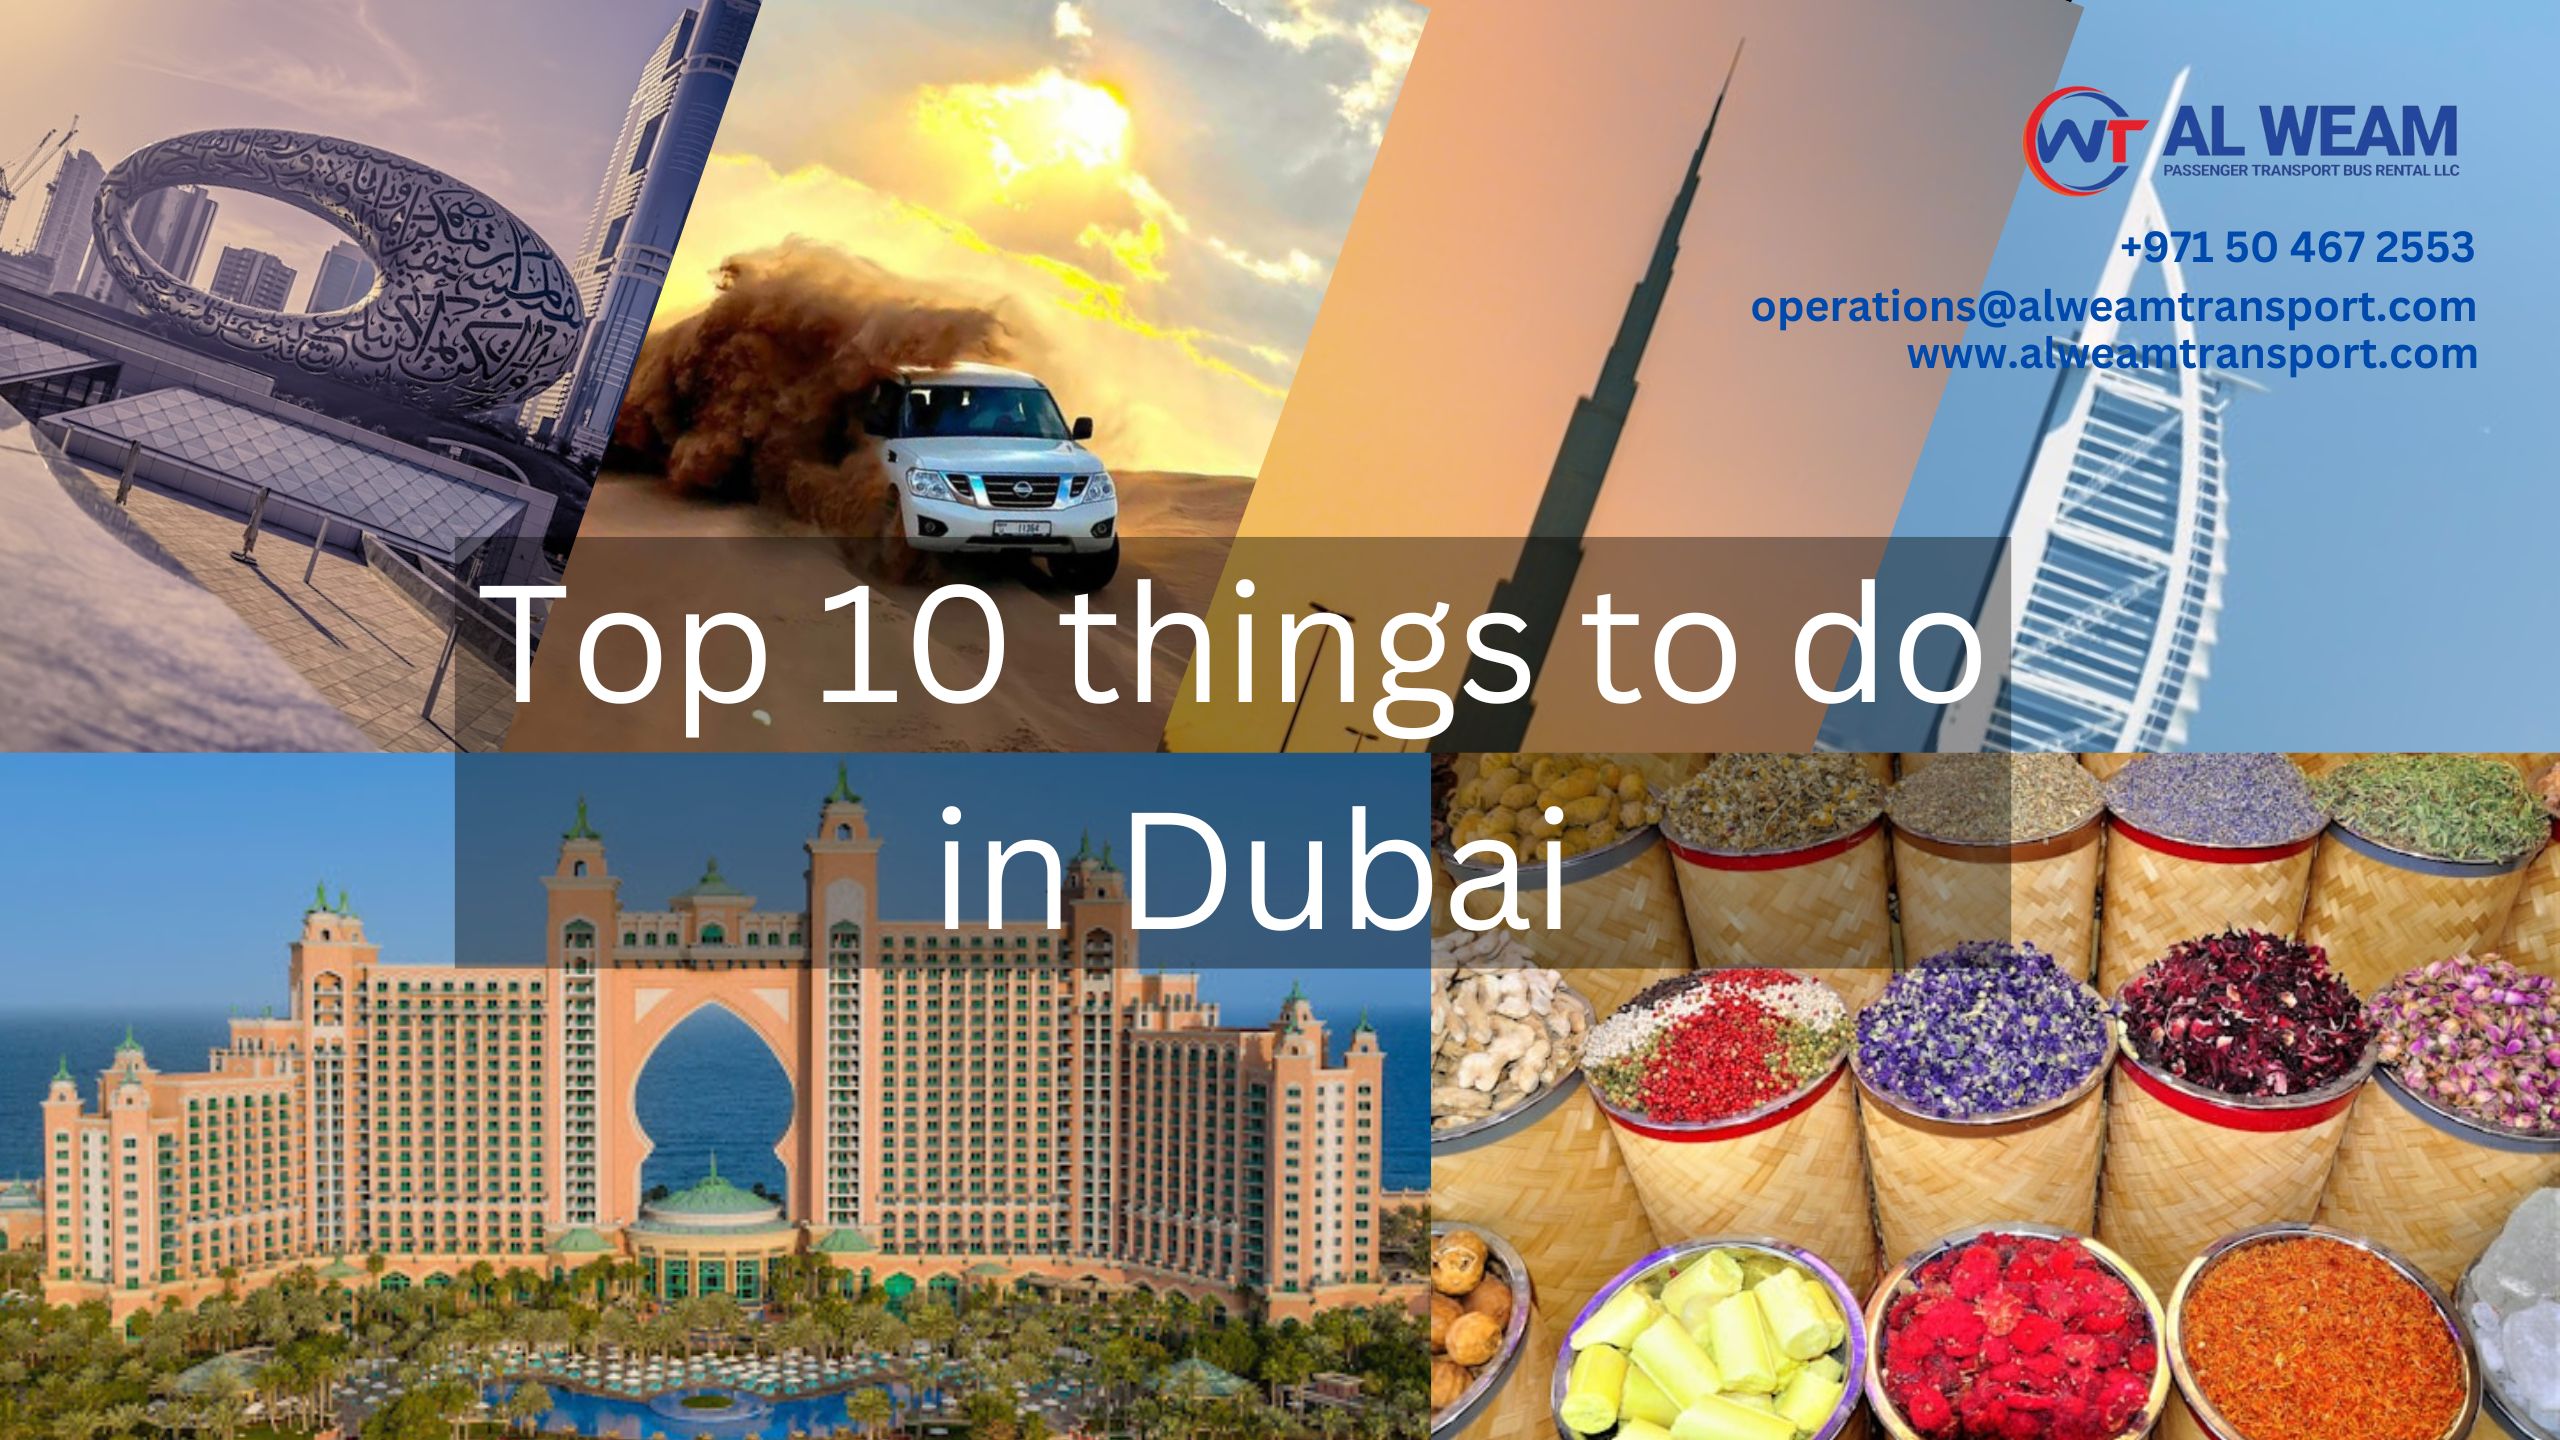 Top 10 Things to Do in Dubai: Wonderful Mix of Attractions and Traditions